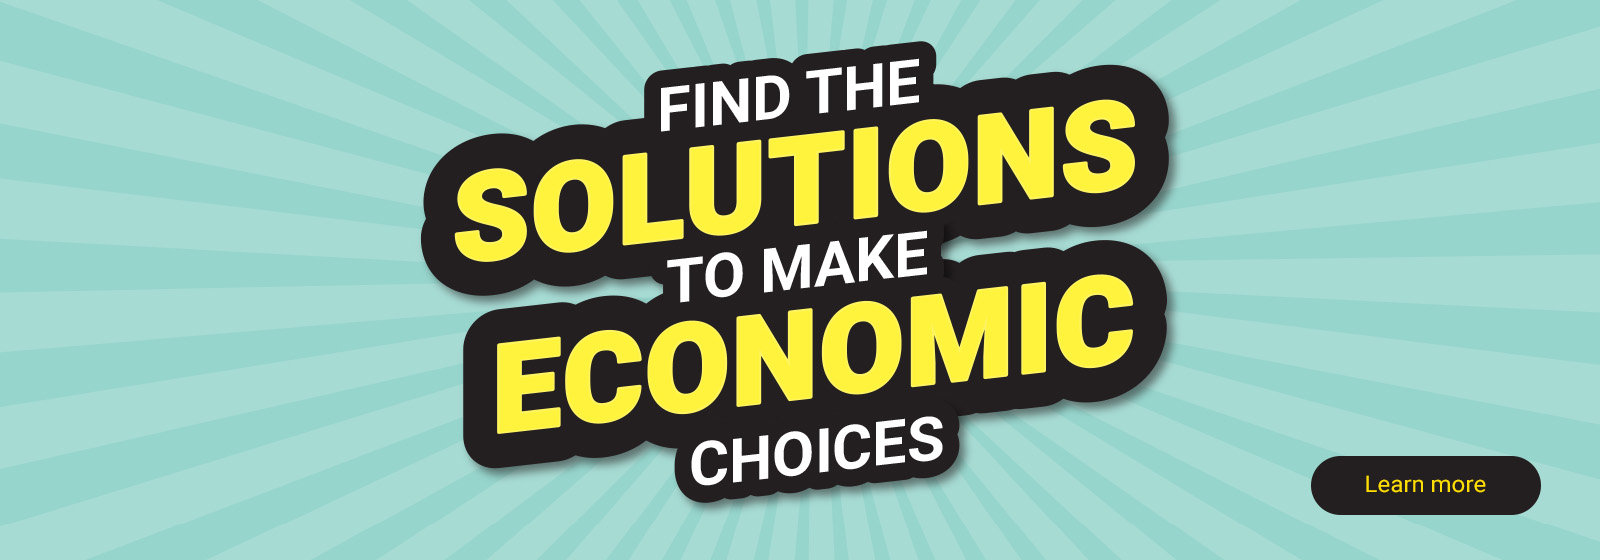 The following image consists of the text, "Find the solutions to make economic choices, Learn More."